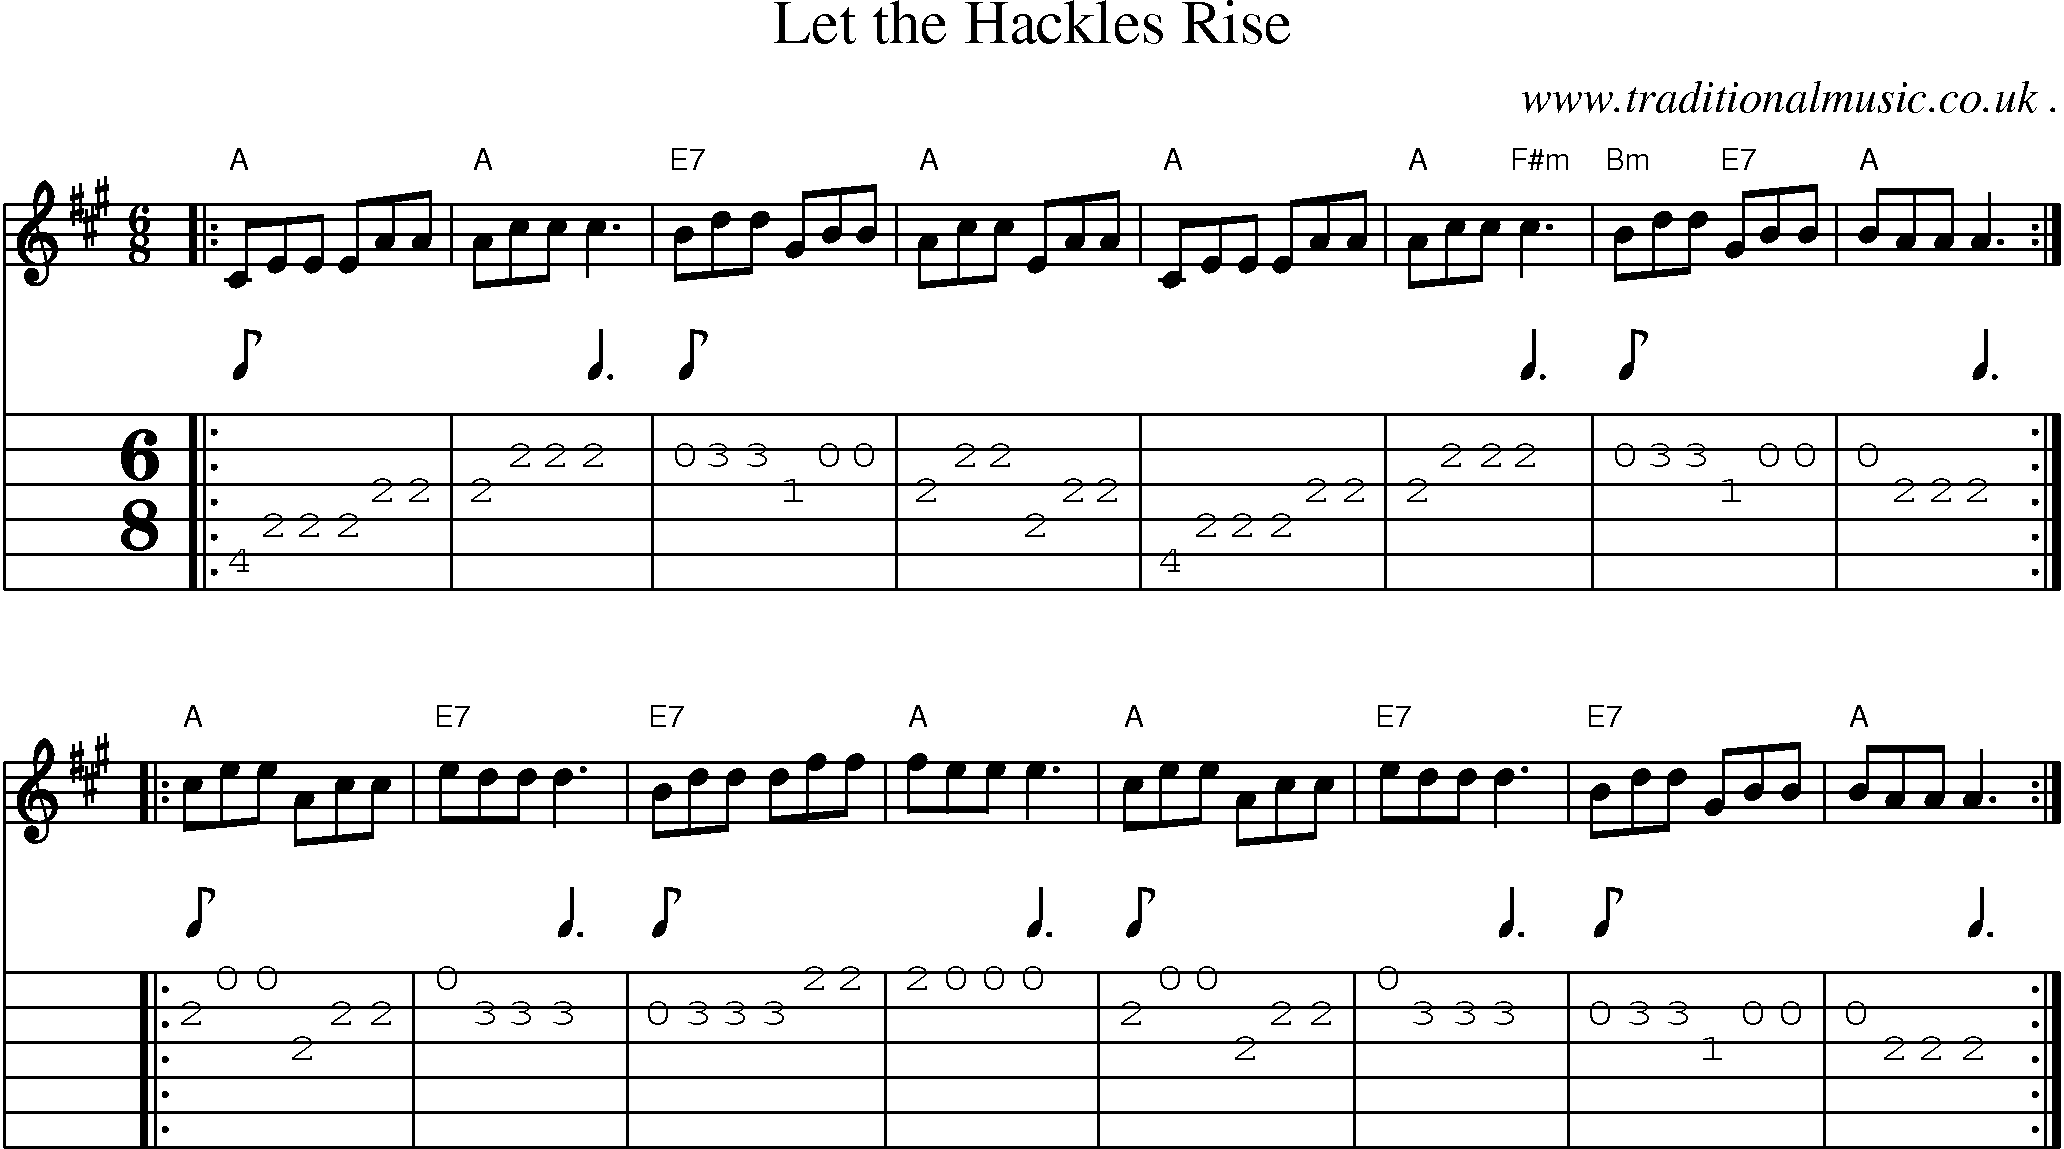 Sheet-music  score, Chords and Guitar Tabs for Let The Hackles Rise